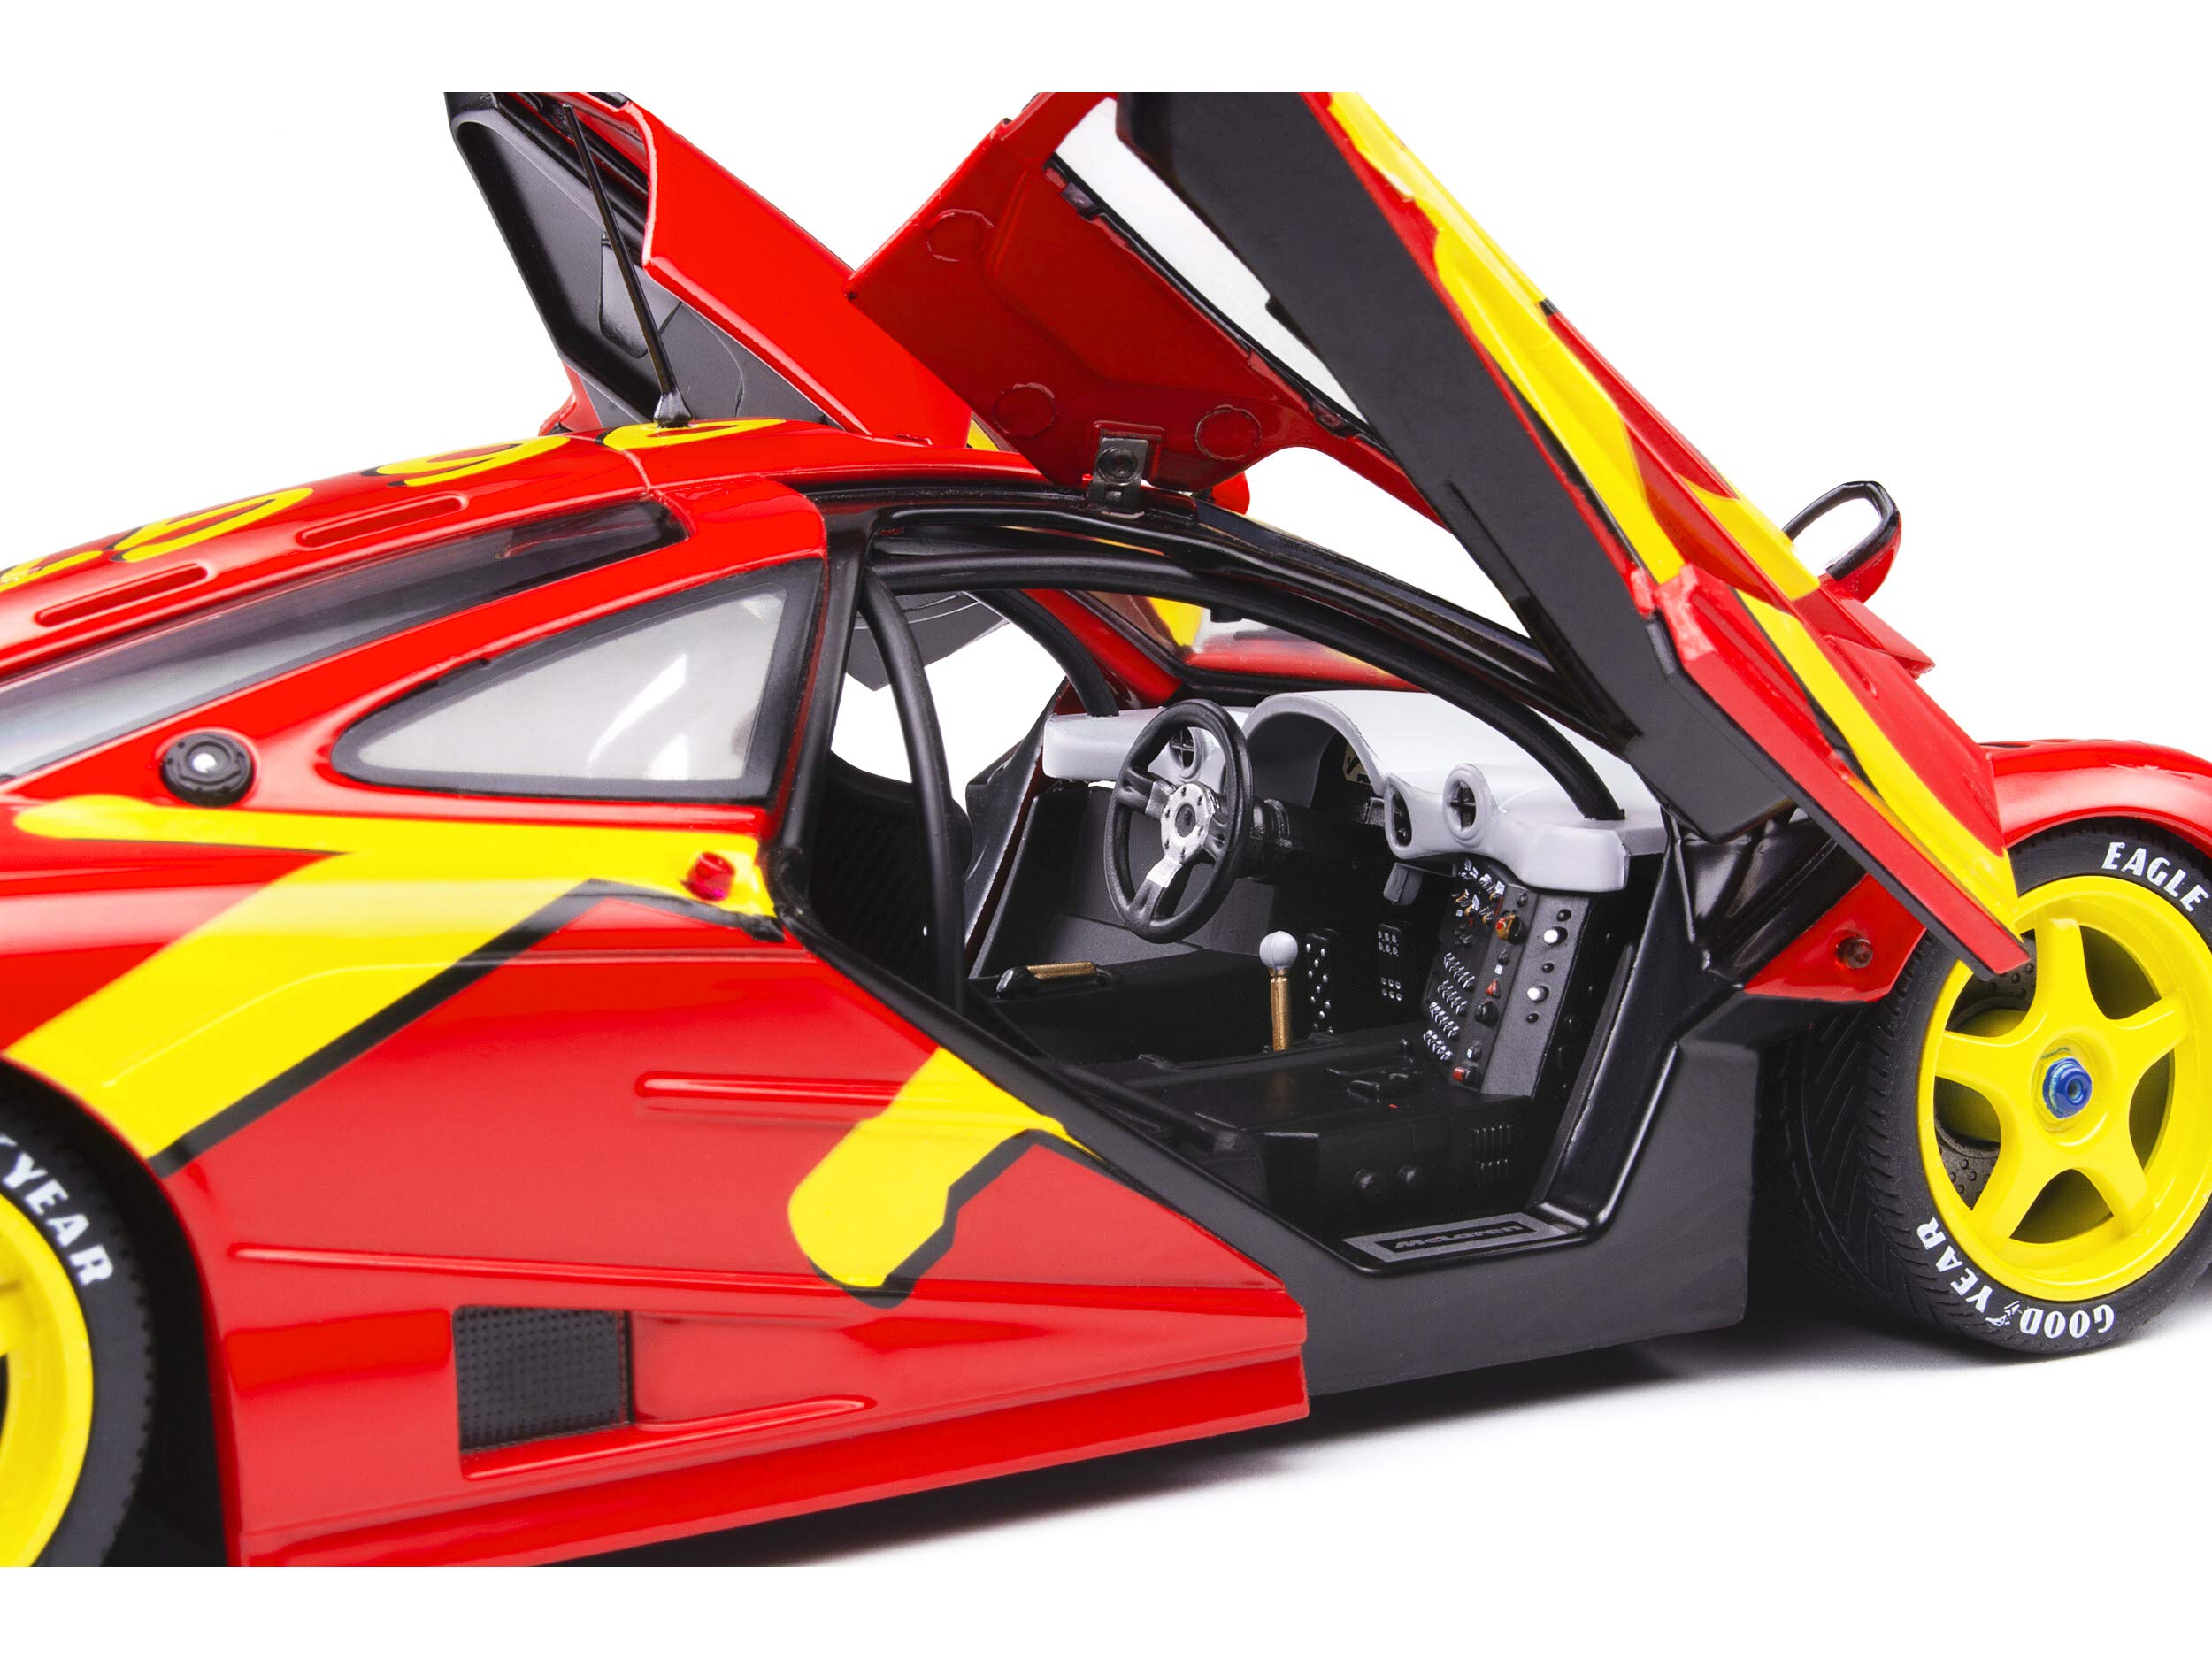 1996 McLaren F1 GTR Short Tail Launch Livery Red with Yellow Graphics 1/18 Diecast Model Car by Solido S1804102